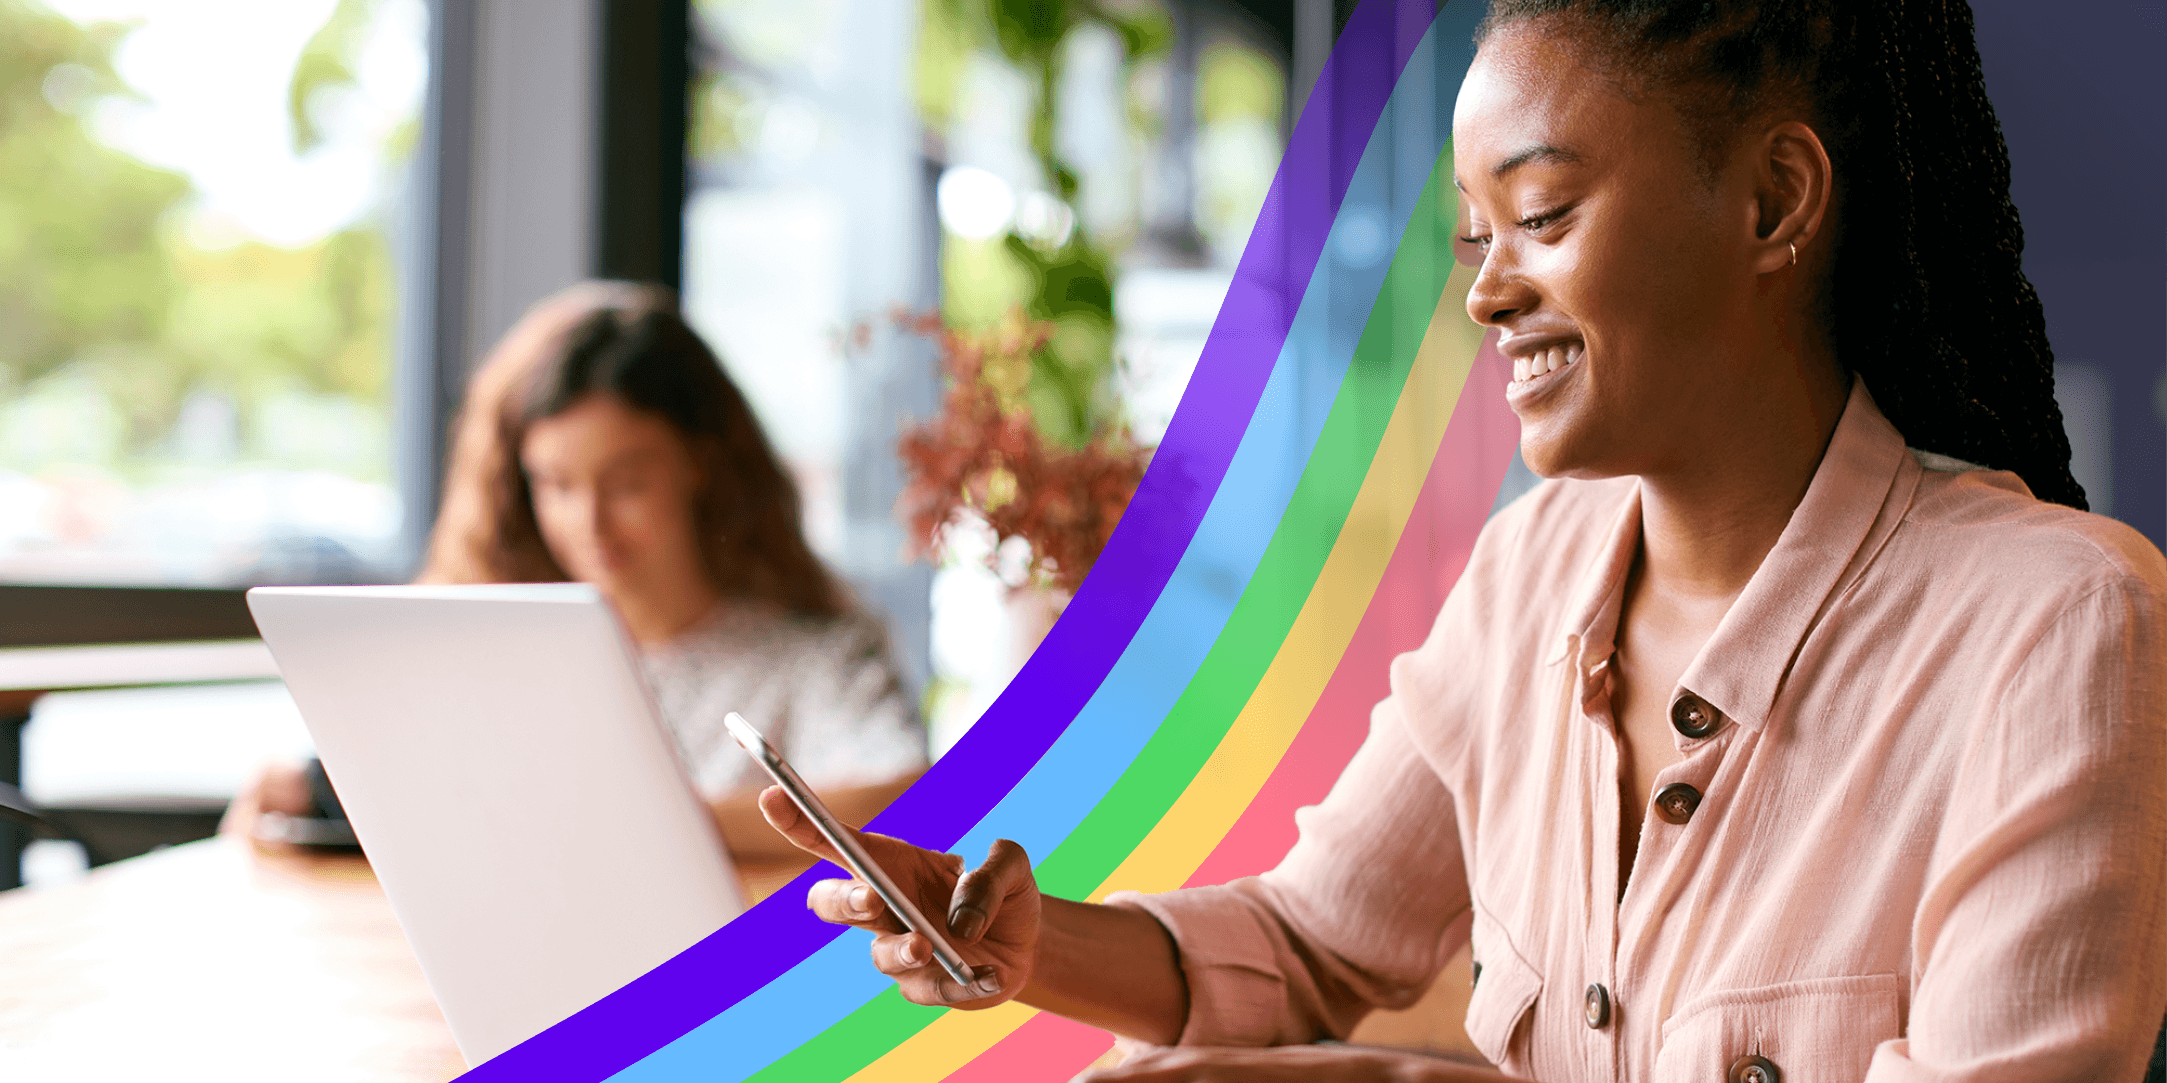 Cat DiStasio shares why companies should build their culture to support LGBTQIA+ employees every day, rather than one month a year. 